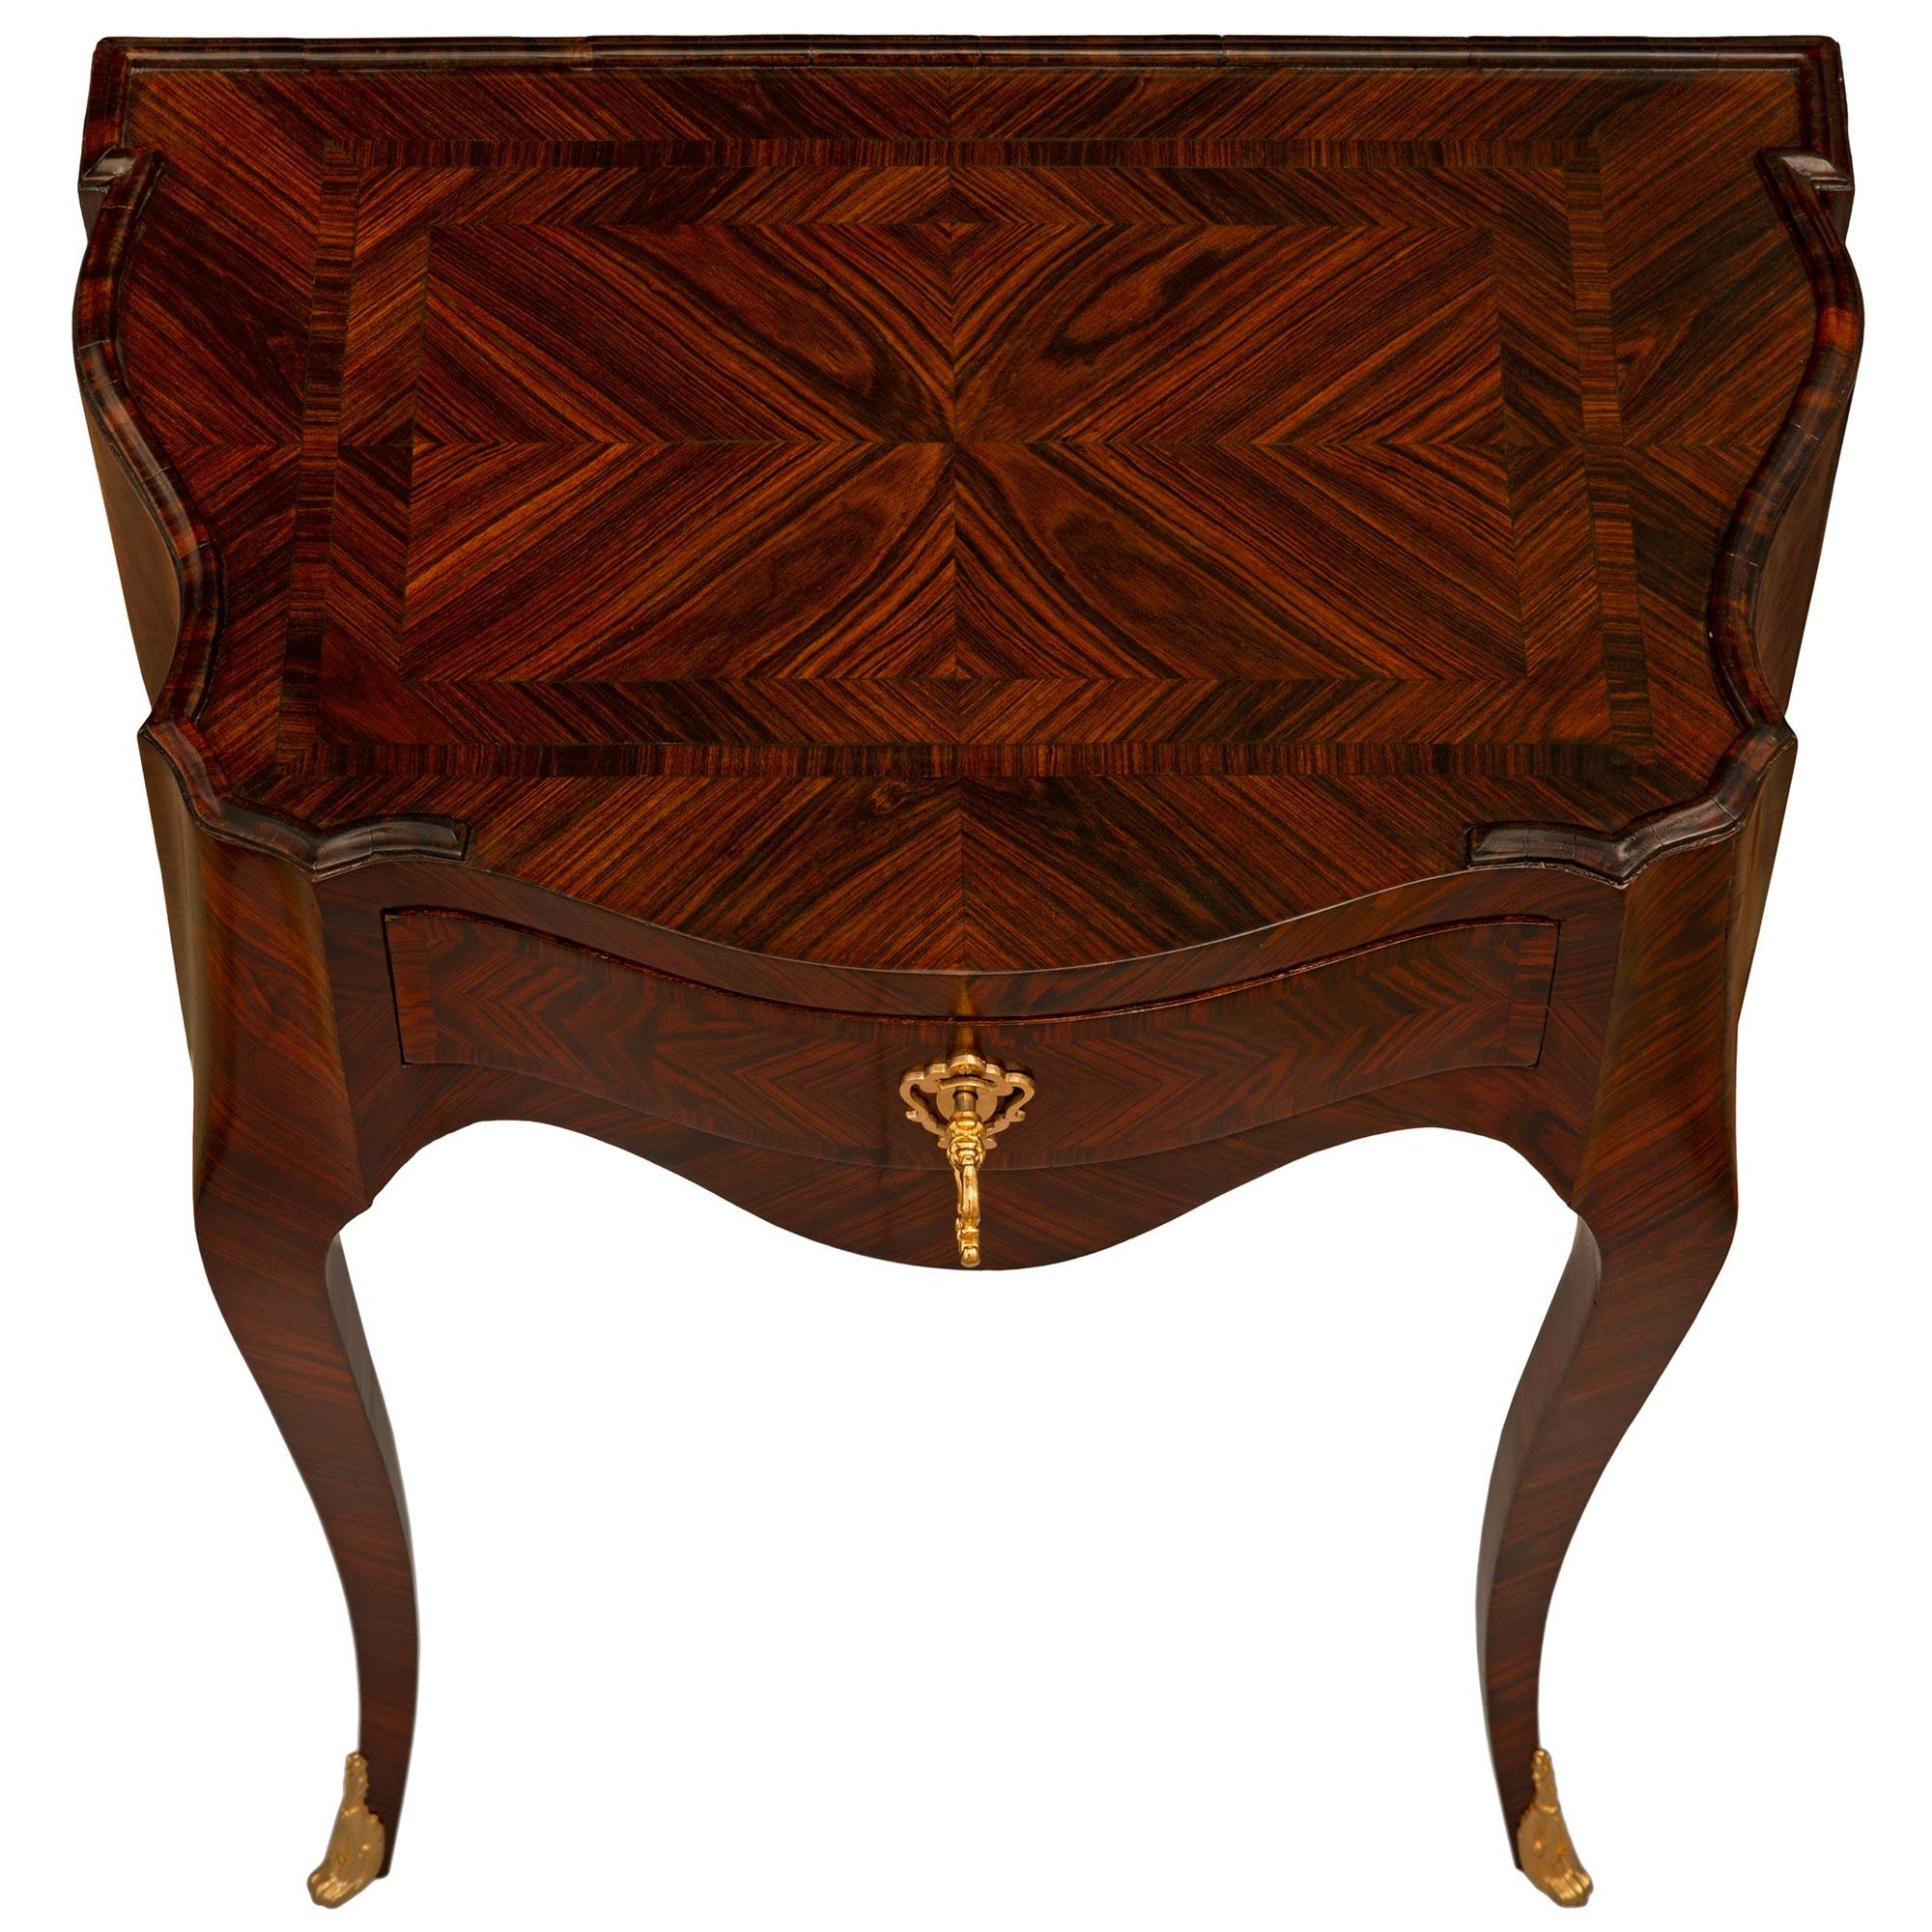 A beautiful and high quality pair of Italian 19th century Genovese st. Rosewood and Ormolu side tables. Each exceptional single drawer side table is raised by four tapered cabriole legs with Ormolu foliate sabots on the two front legs. The arbalest